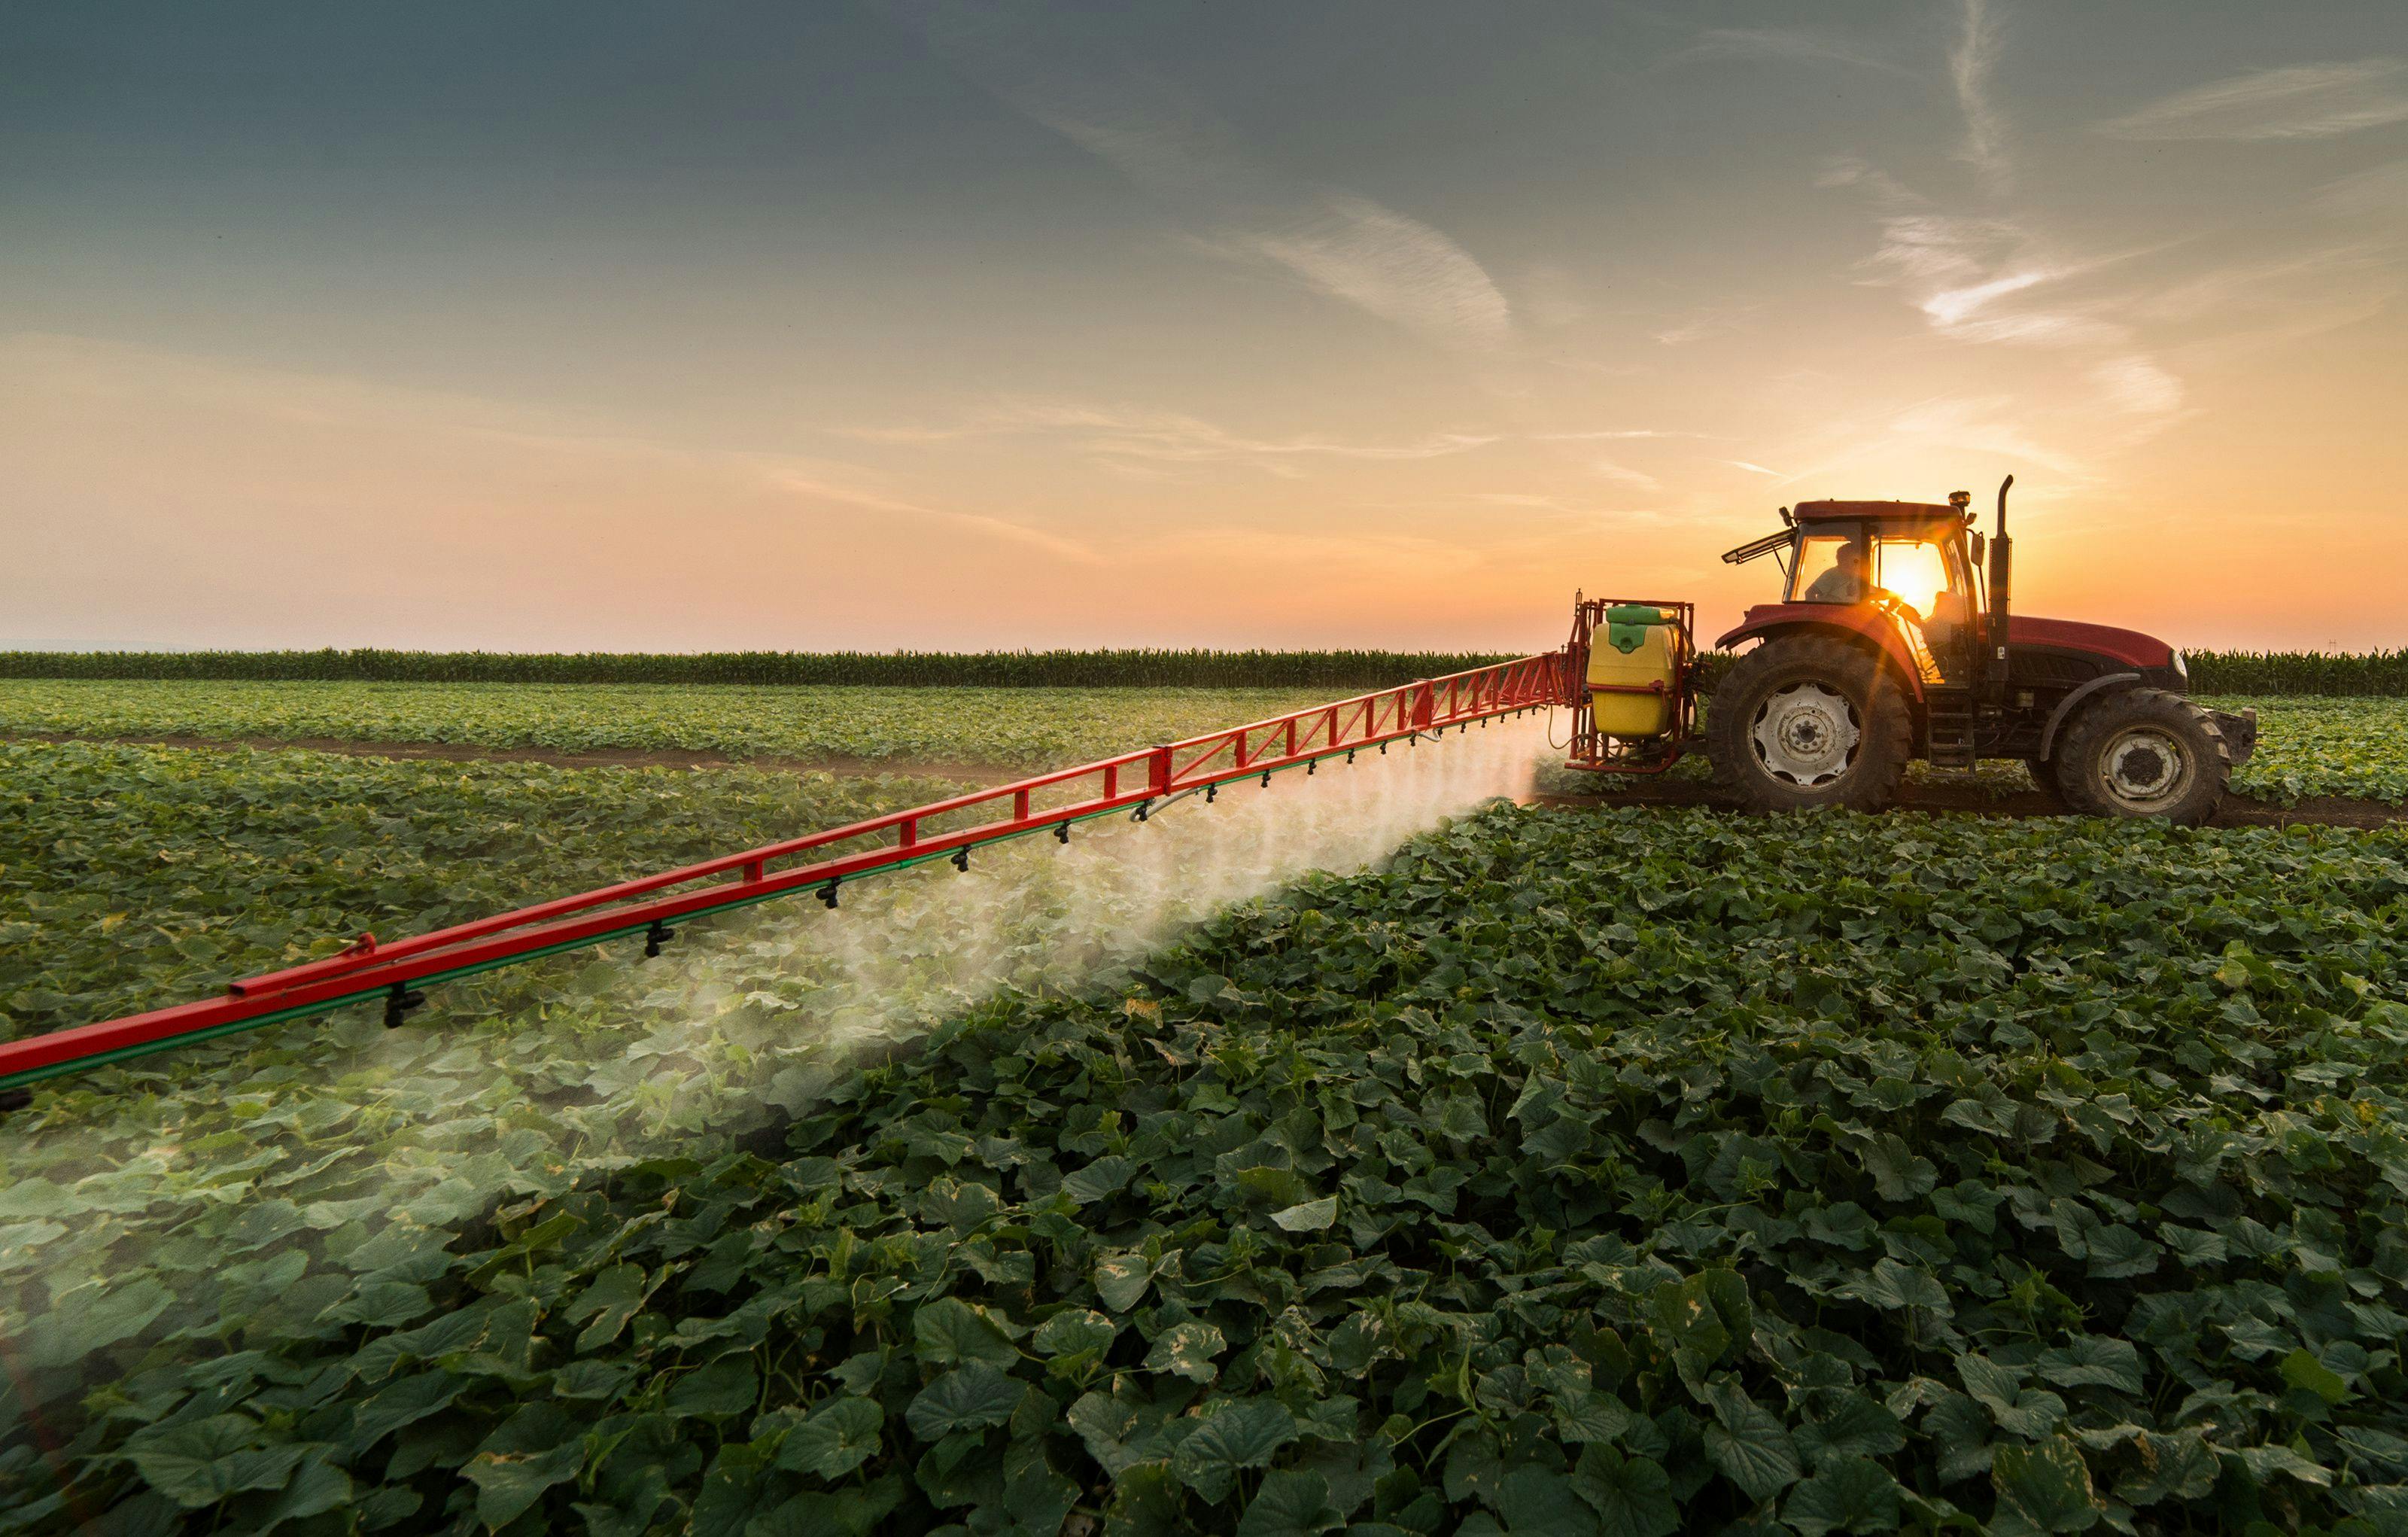 Tractor spraying pesticides on vegetable field with sprayer at spring | Image Credit: © Dusan Kostic - stock.adobe.com